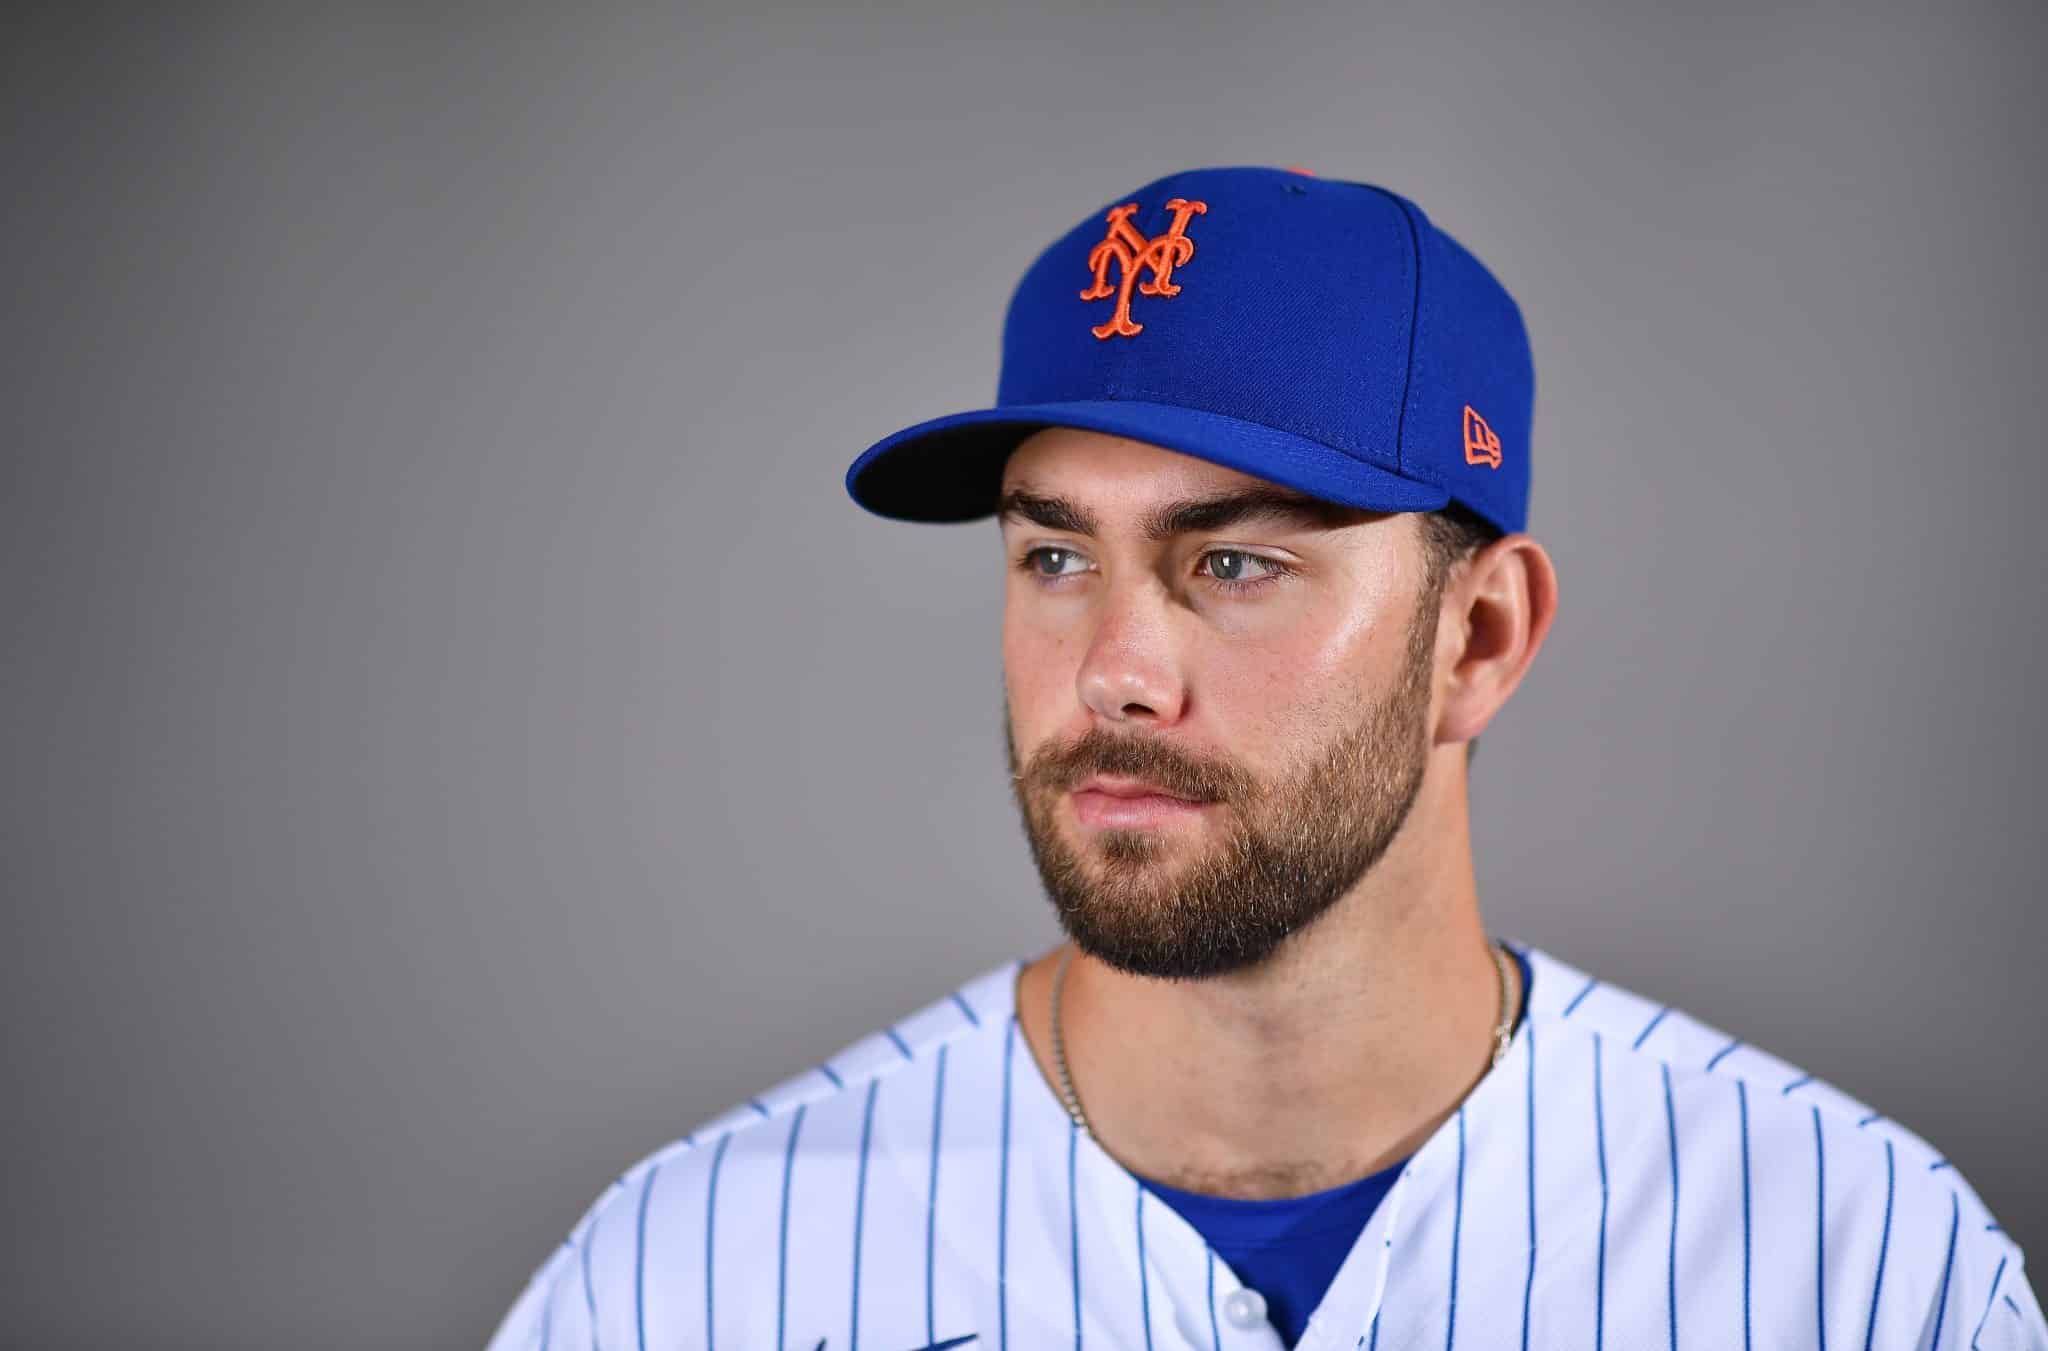 PORT ST. LUCIE, FLORIDA - FEBRUARY 20: David Peterson #77 of the New York Mets poses for a photo during Photo Day at Clover Park on February 20, 2020 in Port St. Lucie, Florida.